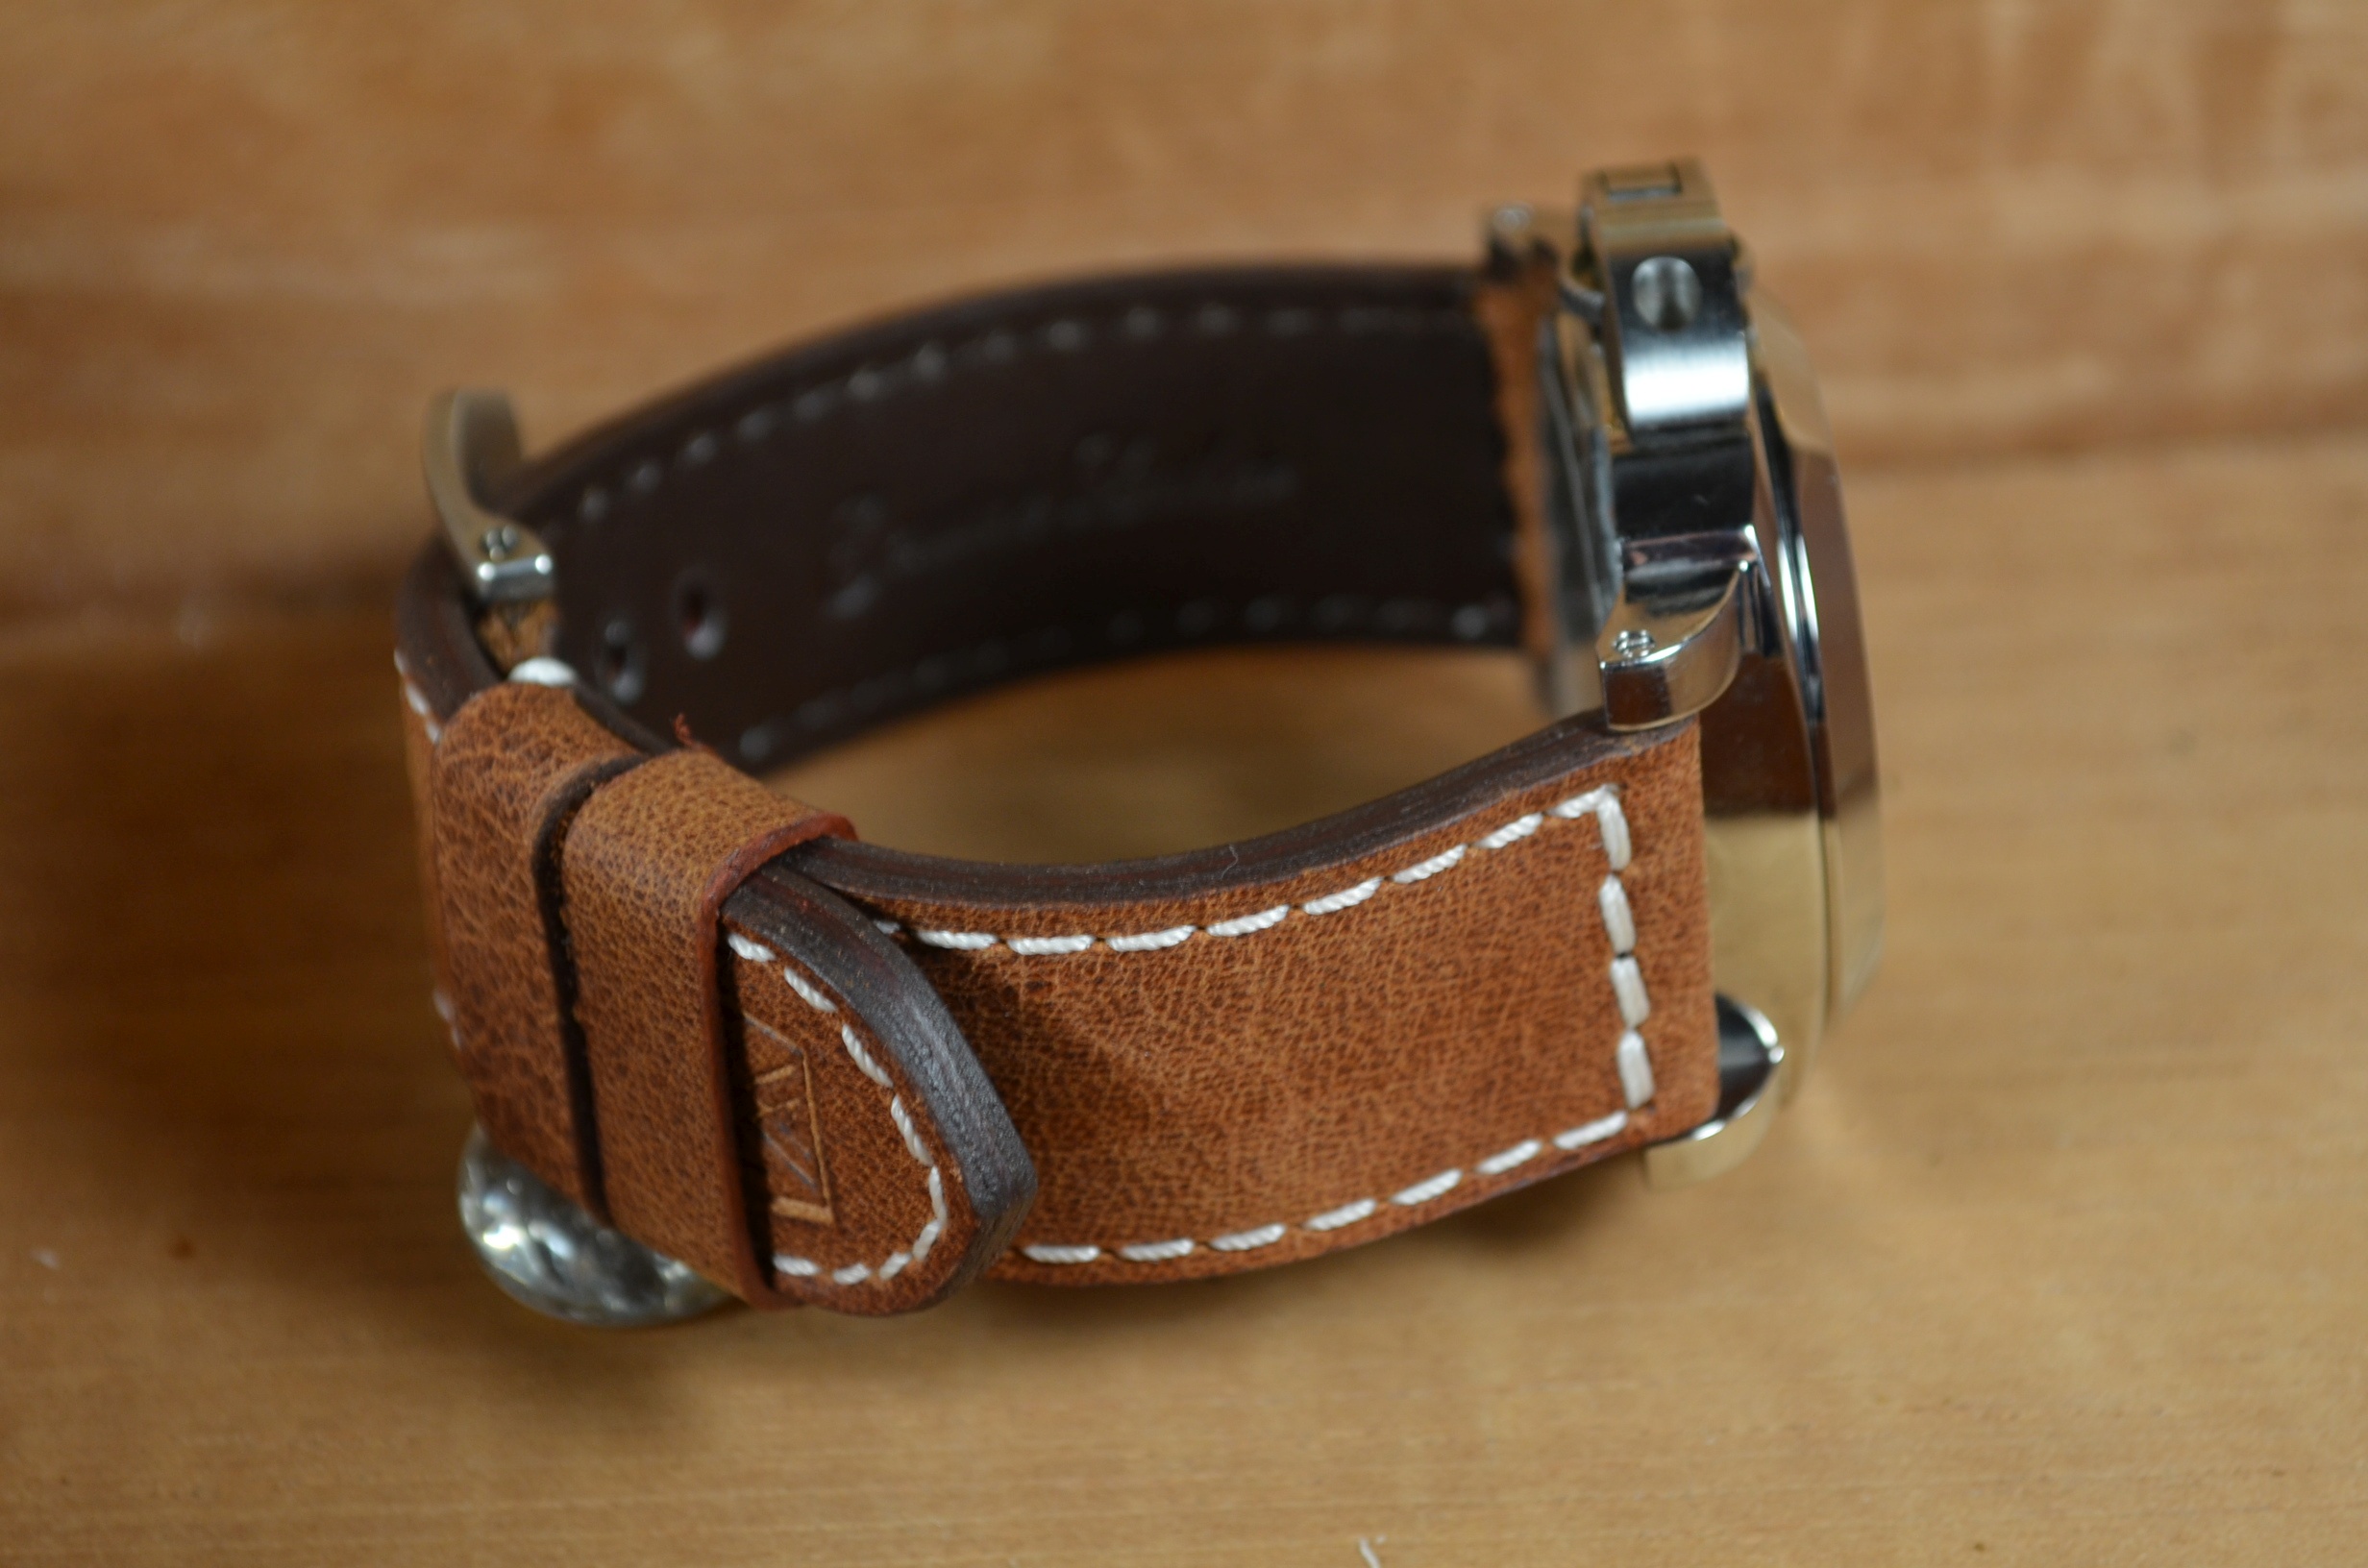 BROWN II is one of our hand crafted watch straps. Available in brown color, 3.5 - 4 mm thick.